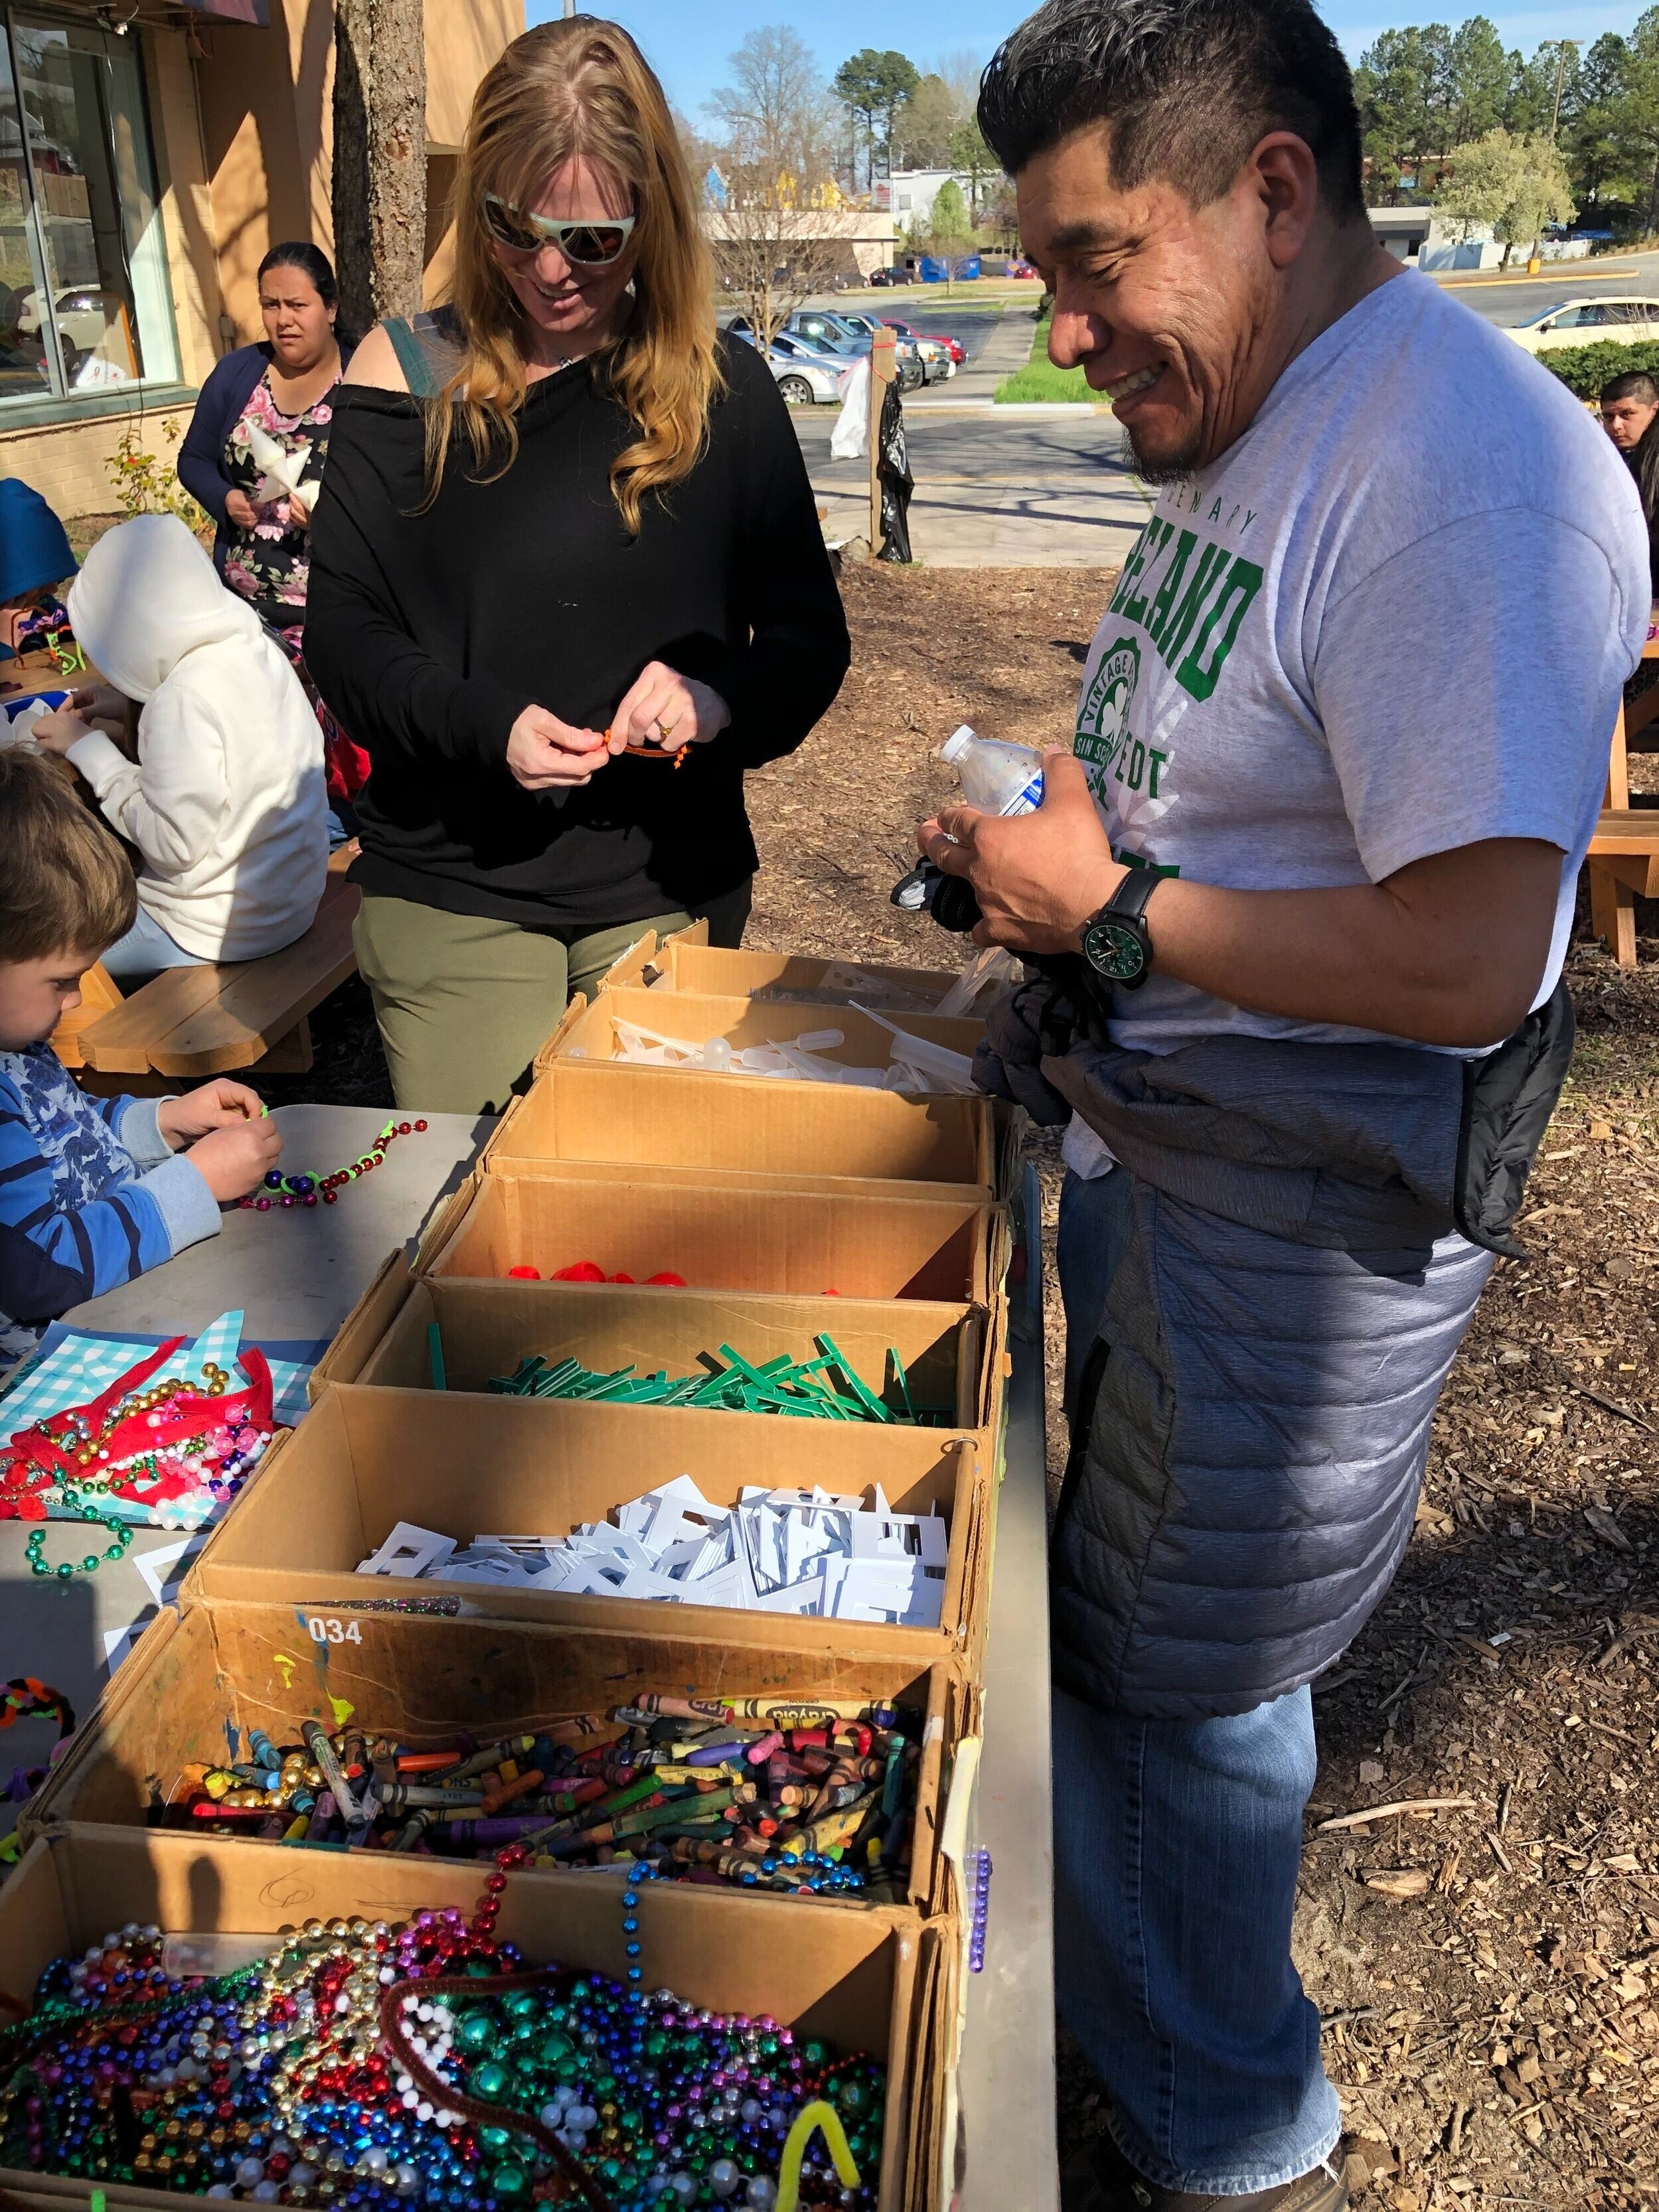  Lead artist Cornelio Campos interacts with community members at the fiesta through a creative activity sponsored by Scrap Exchange, one of El Futuro’s project partners. The gathering of ideas is inspired by hands on art making together.  Photo court